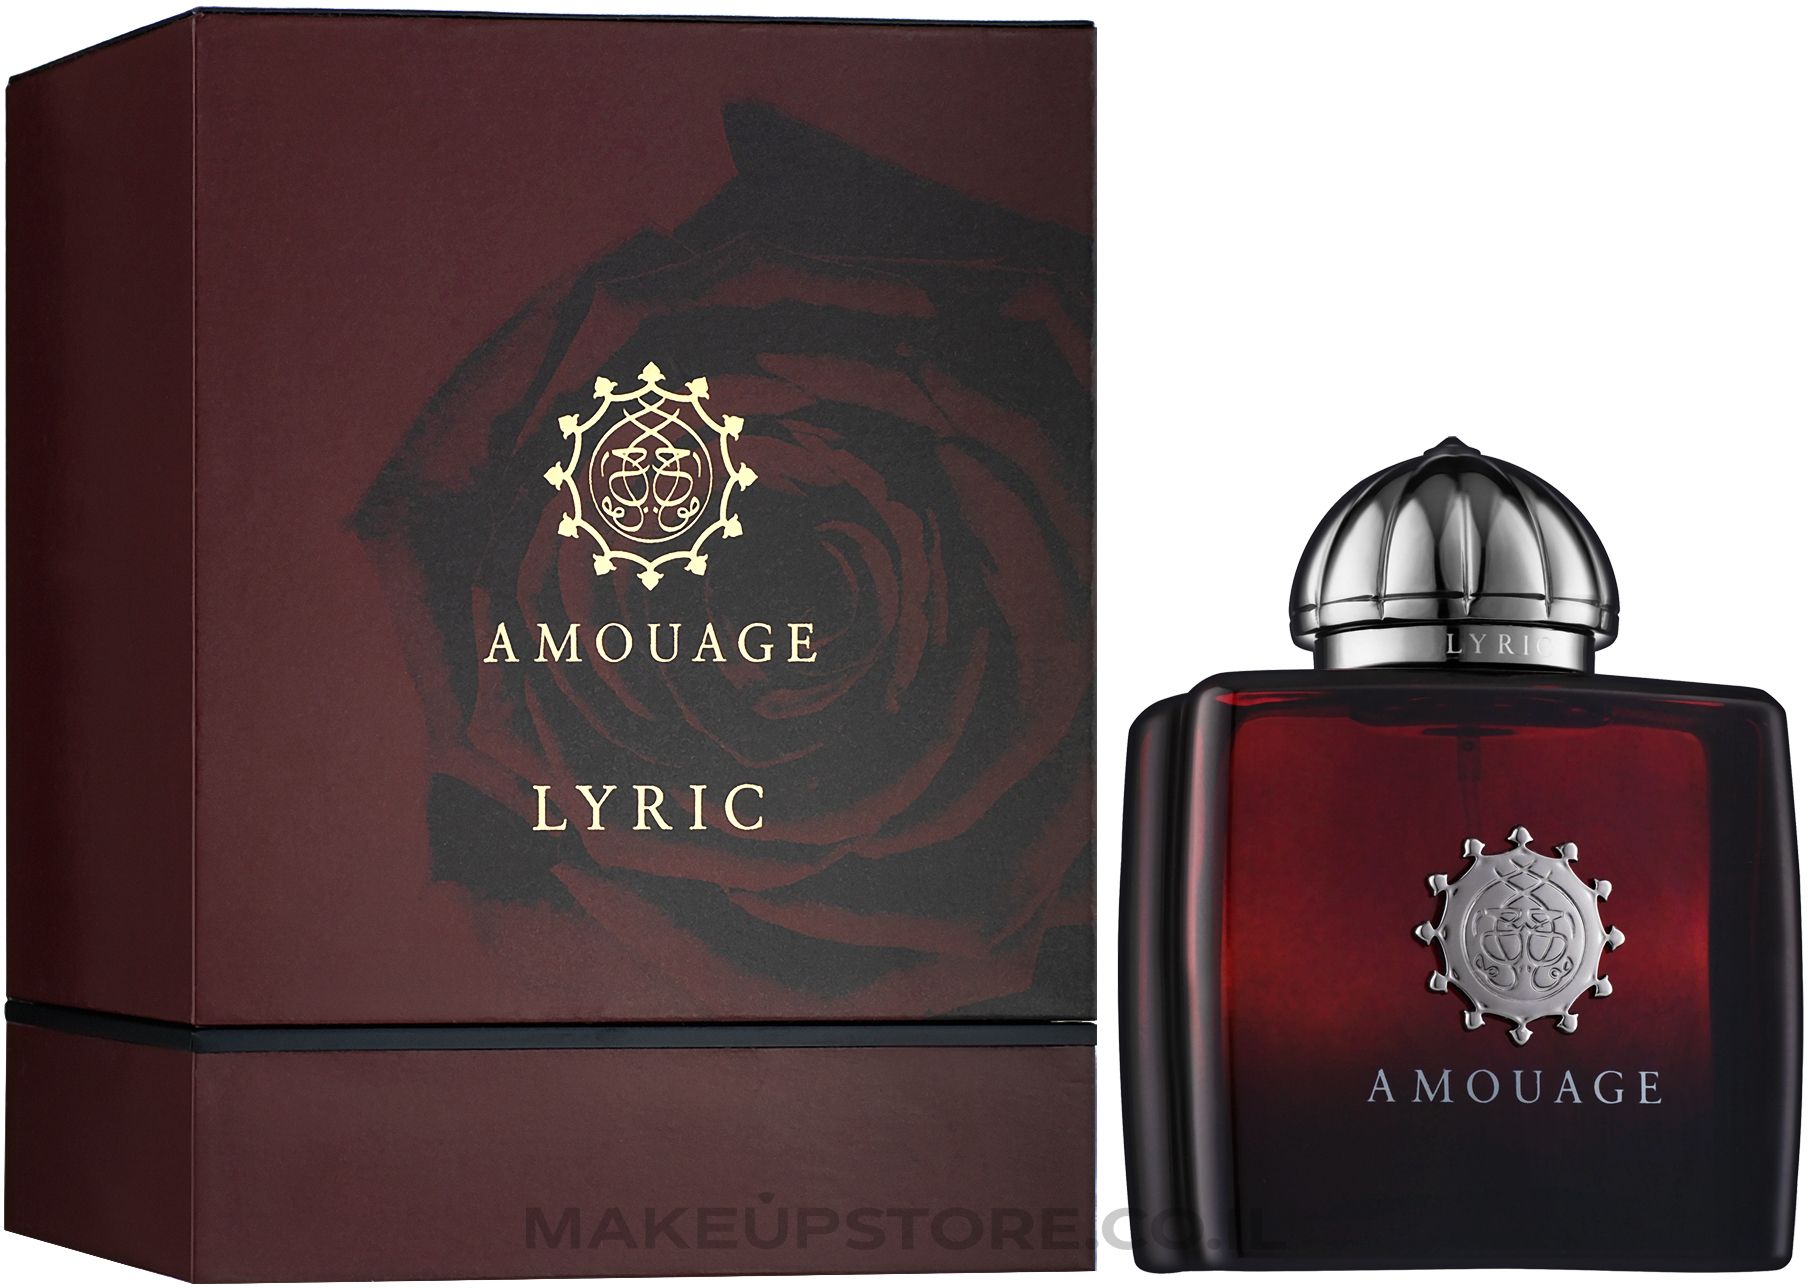 Amouage Lyric for women 100 ml EDP at Ratans Online Shop - Perfumes Wholesale and Retailer Fragrance